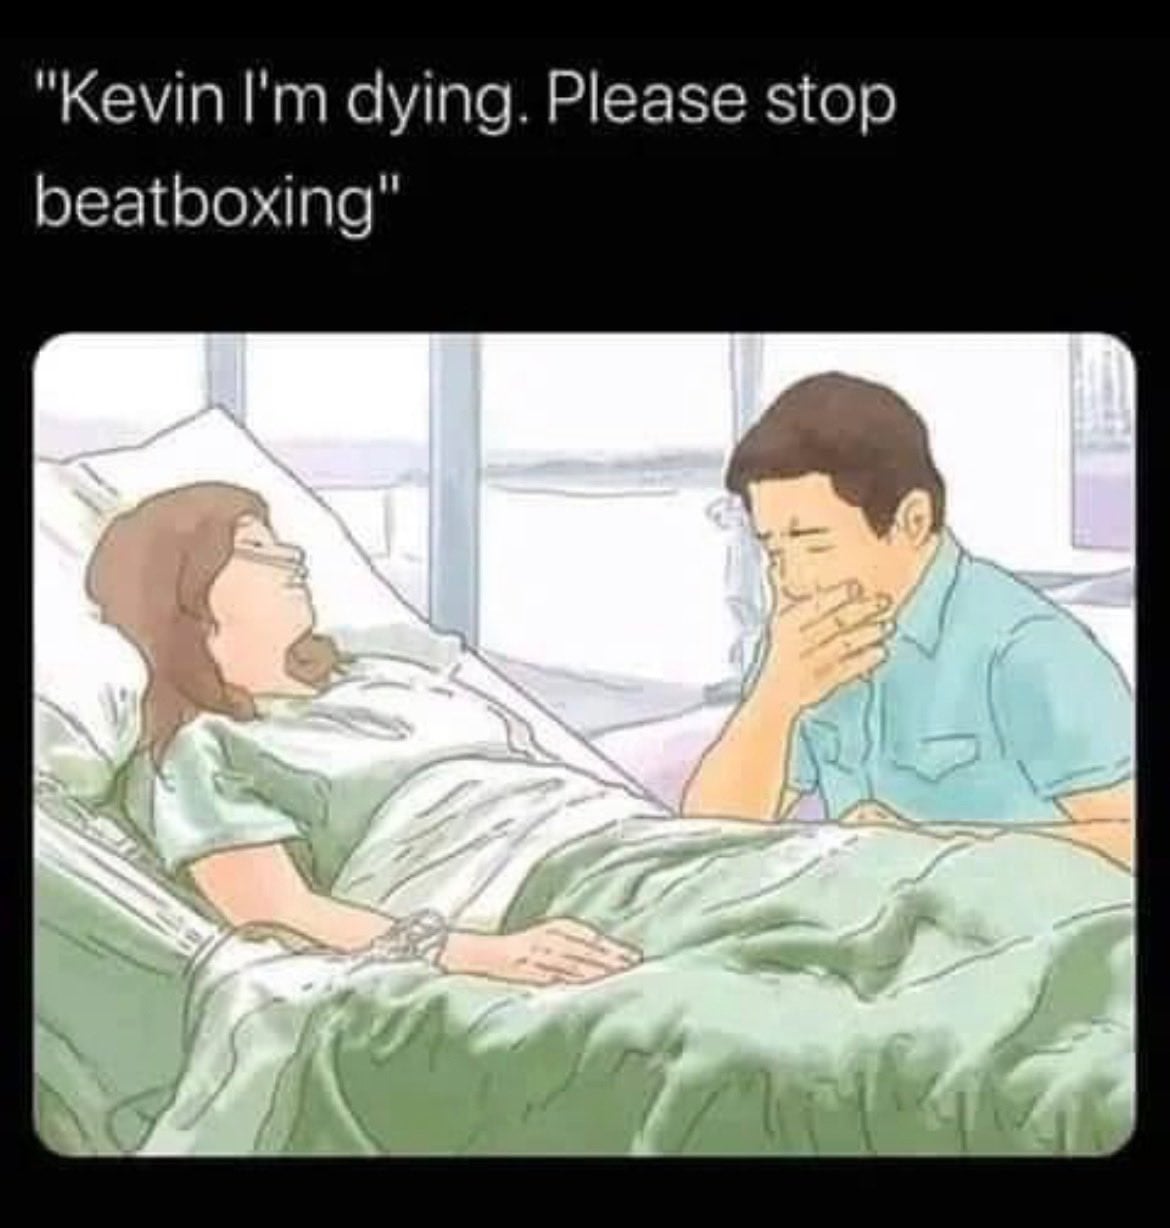 kevin i'm dying, please stop beatboxing